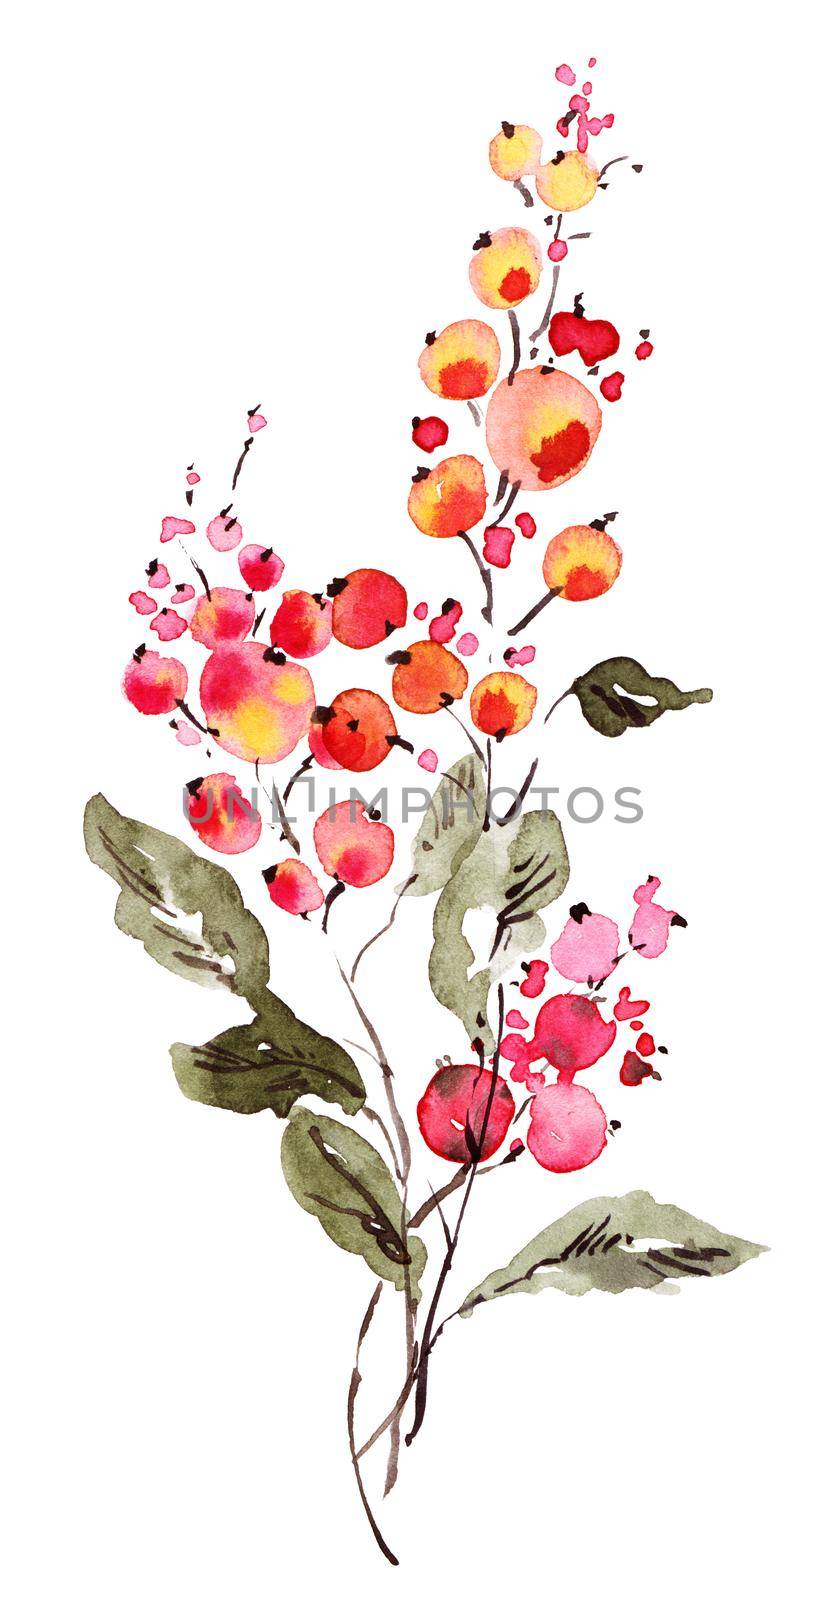 Beautiful bouquet of flowers painted by watercolor. Isolated illustration on white background.